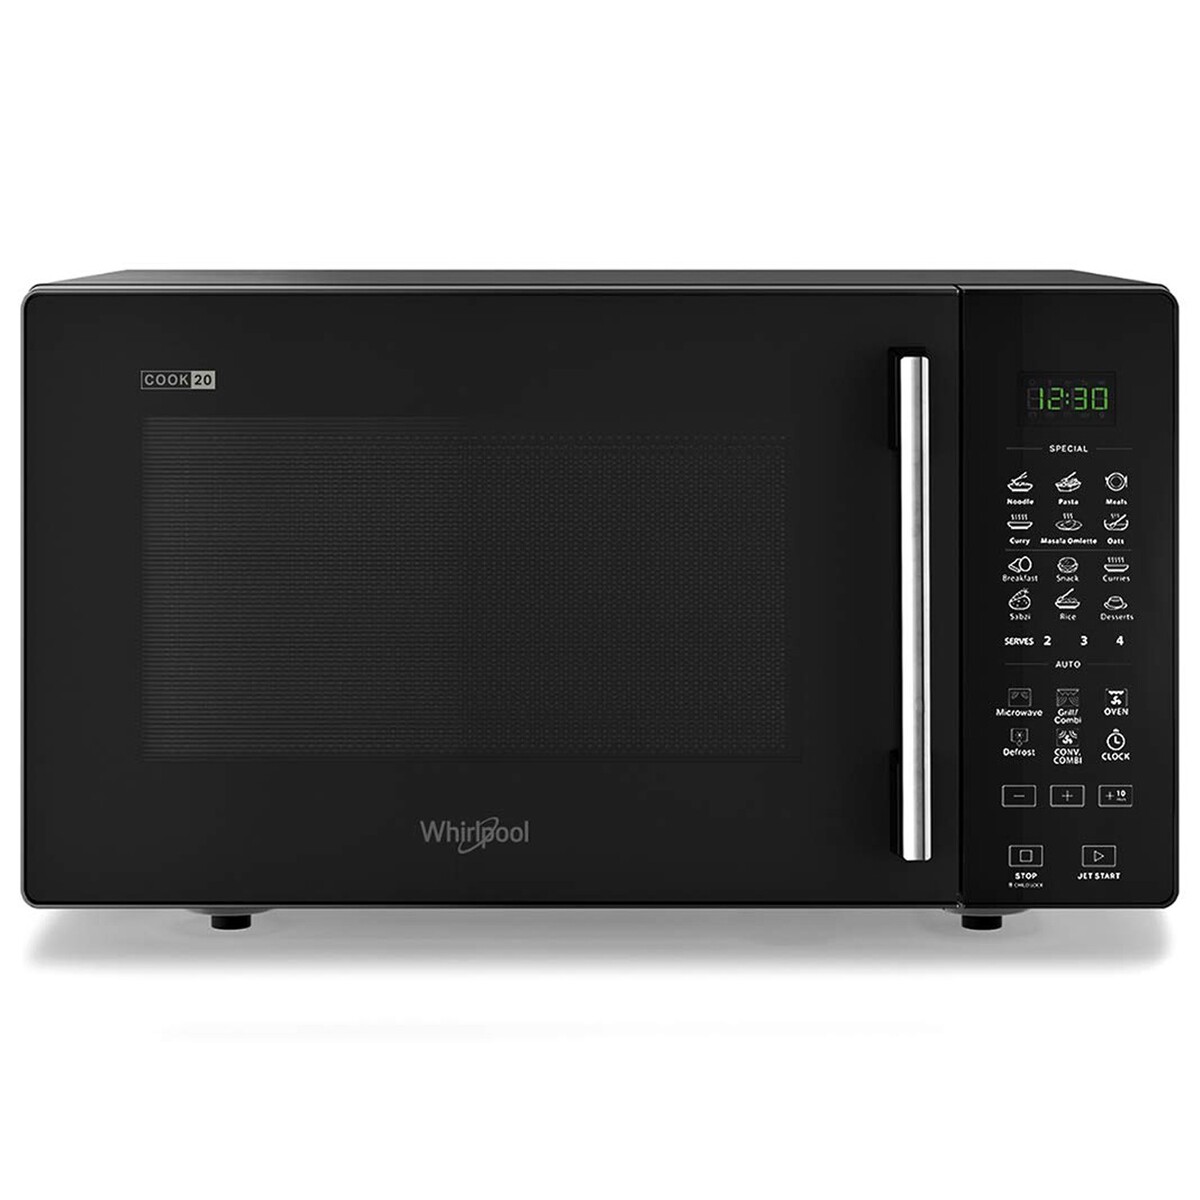 Whirlpool Microwave Oven Magicook Pro 22CE Black 20 Litre